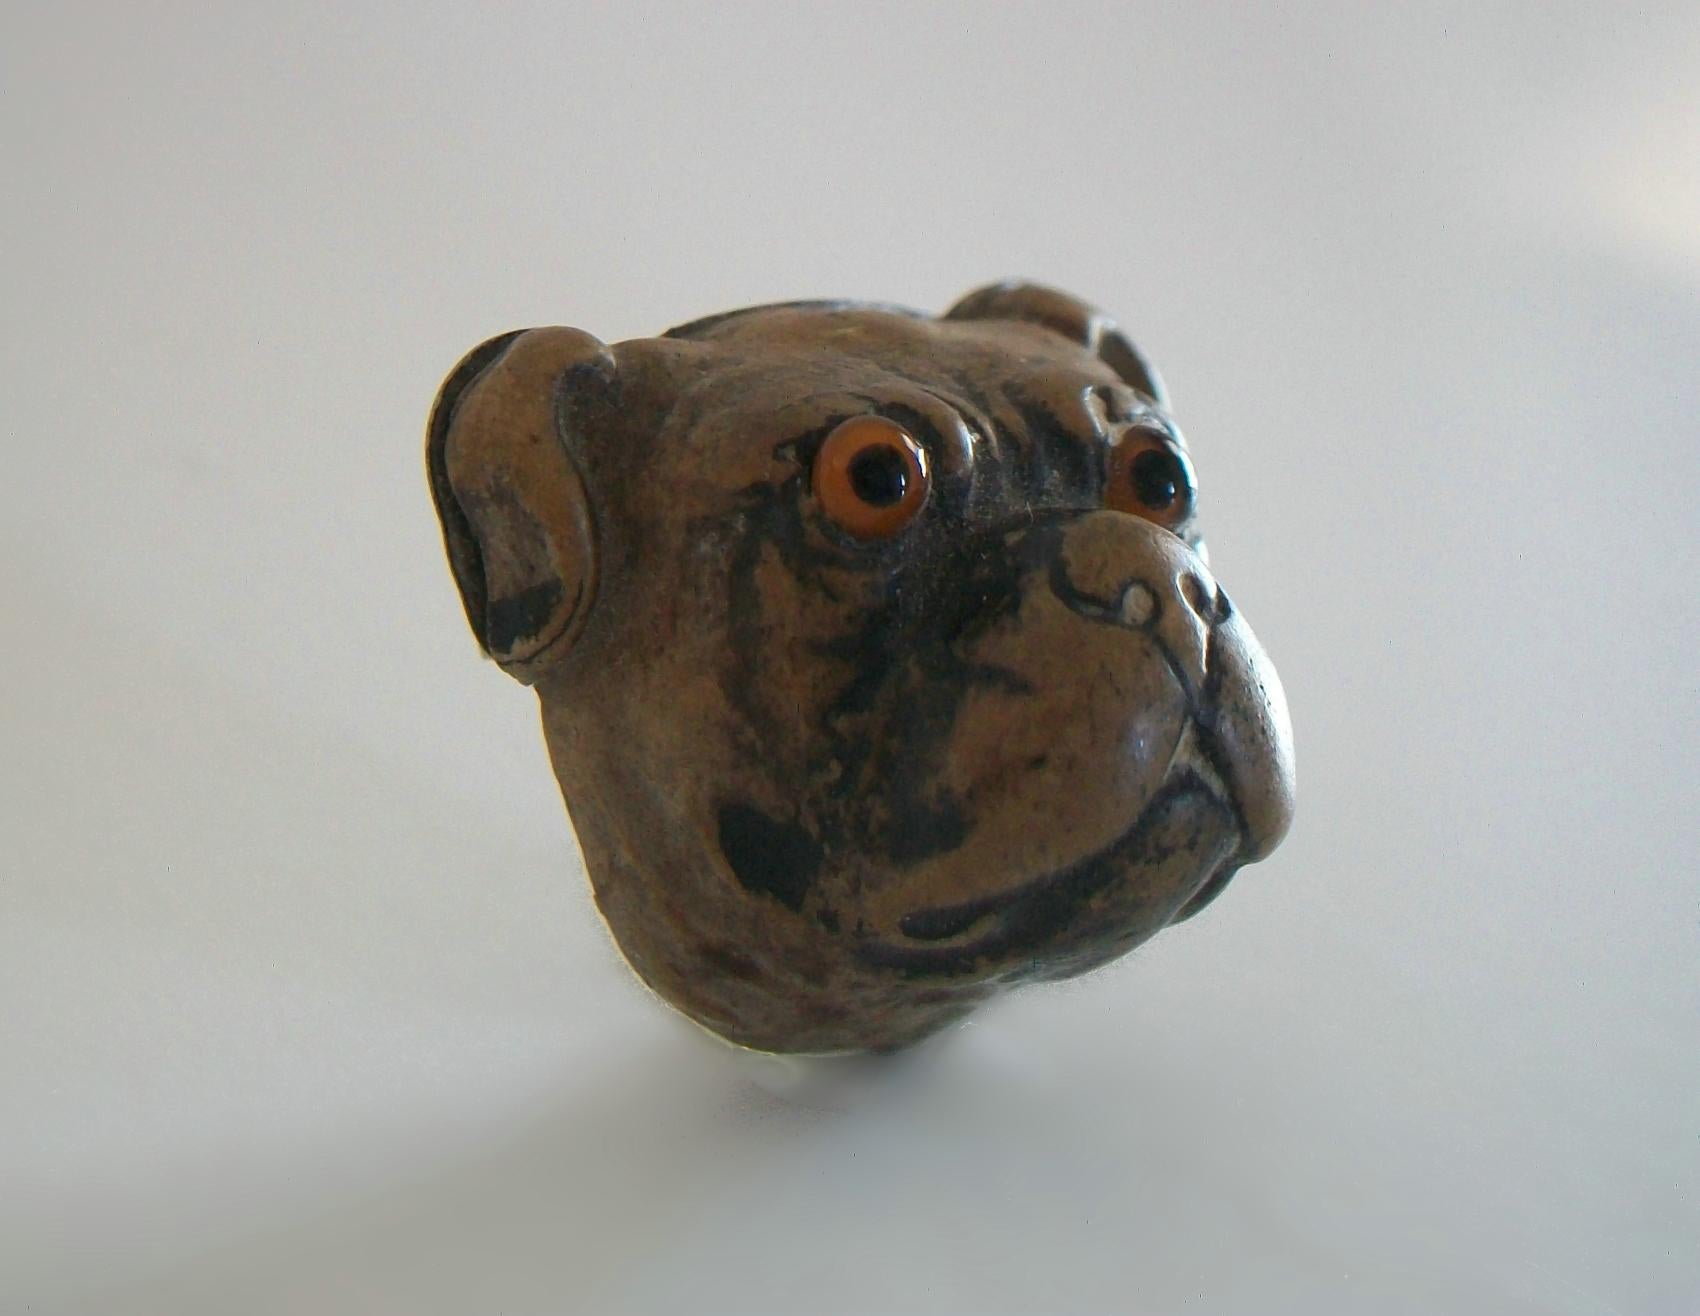 Victorian Vintage Glazed Ceramic 'Bull Dog' Brooch/Pin - Glass Eyes - Early 20th Century For Sale